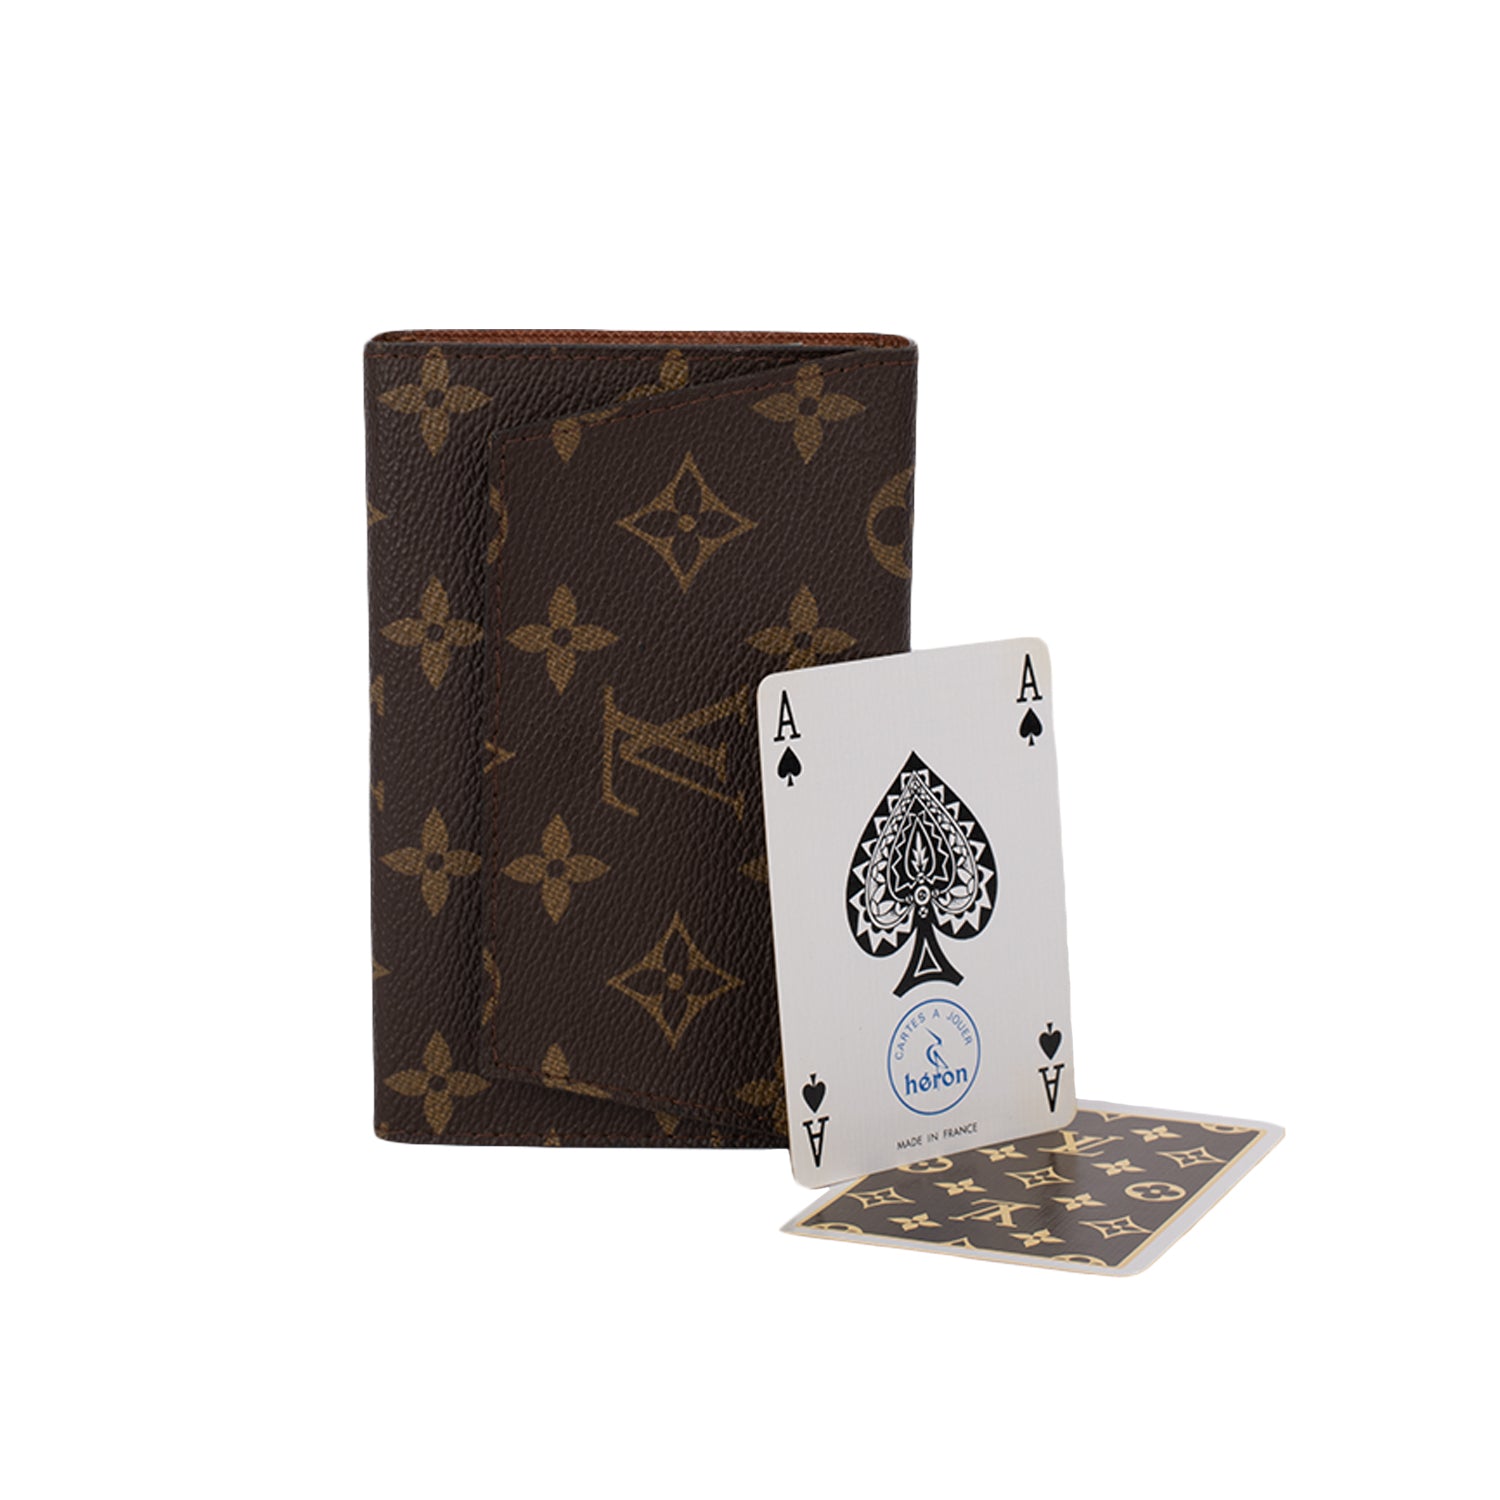 vuitton playing cards